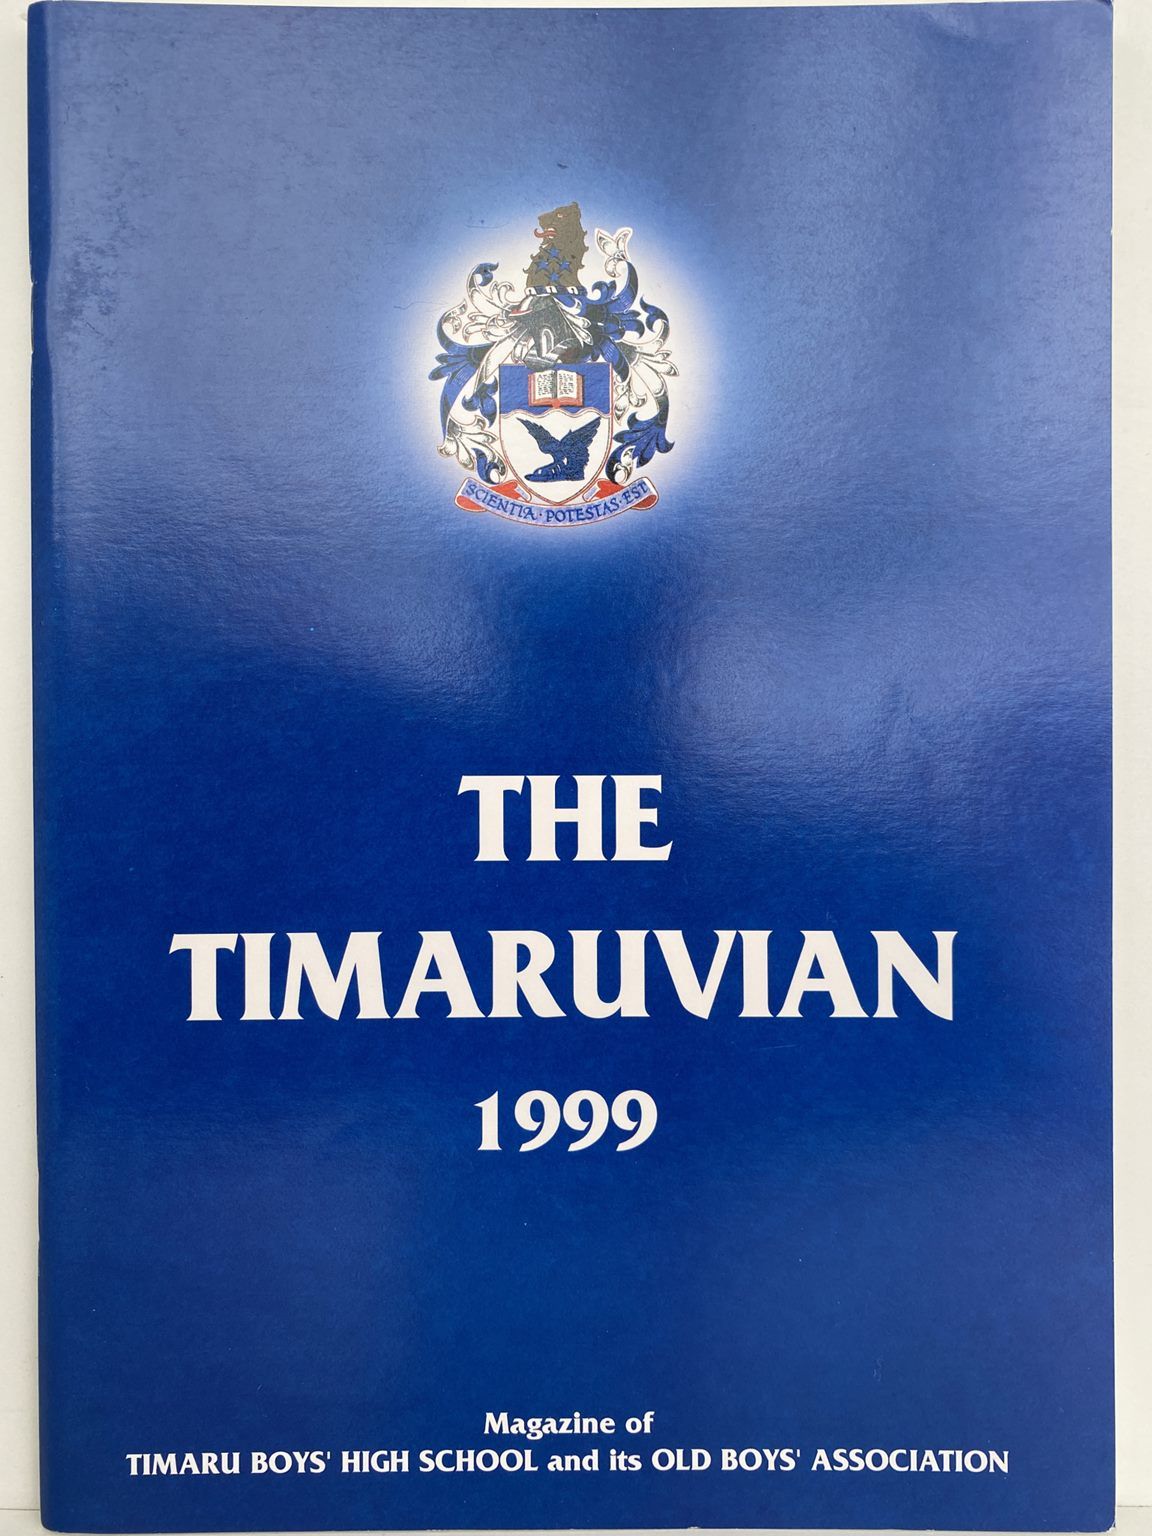 THE TIMARUVIAN: Magazine of the Timaru Boys High School and its Old Boys' Association 1999